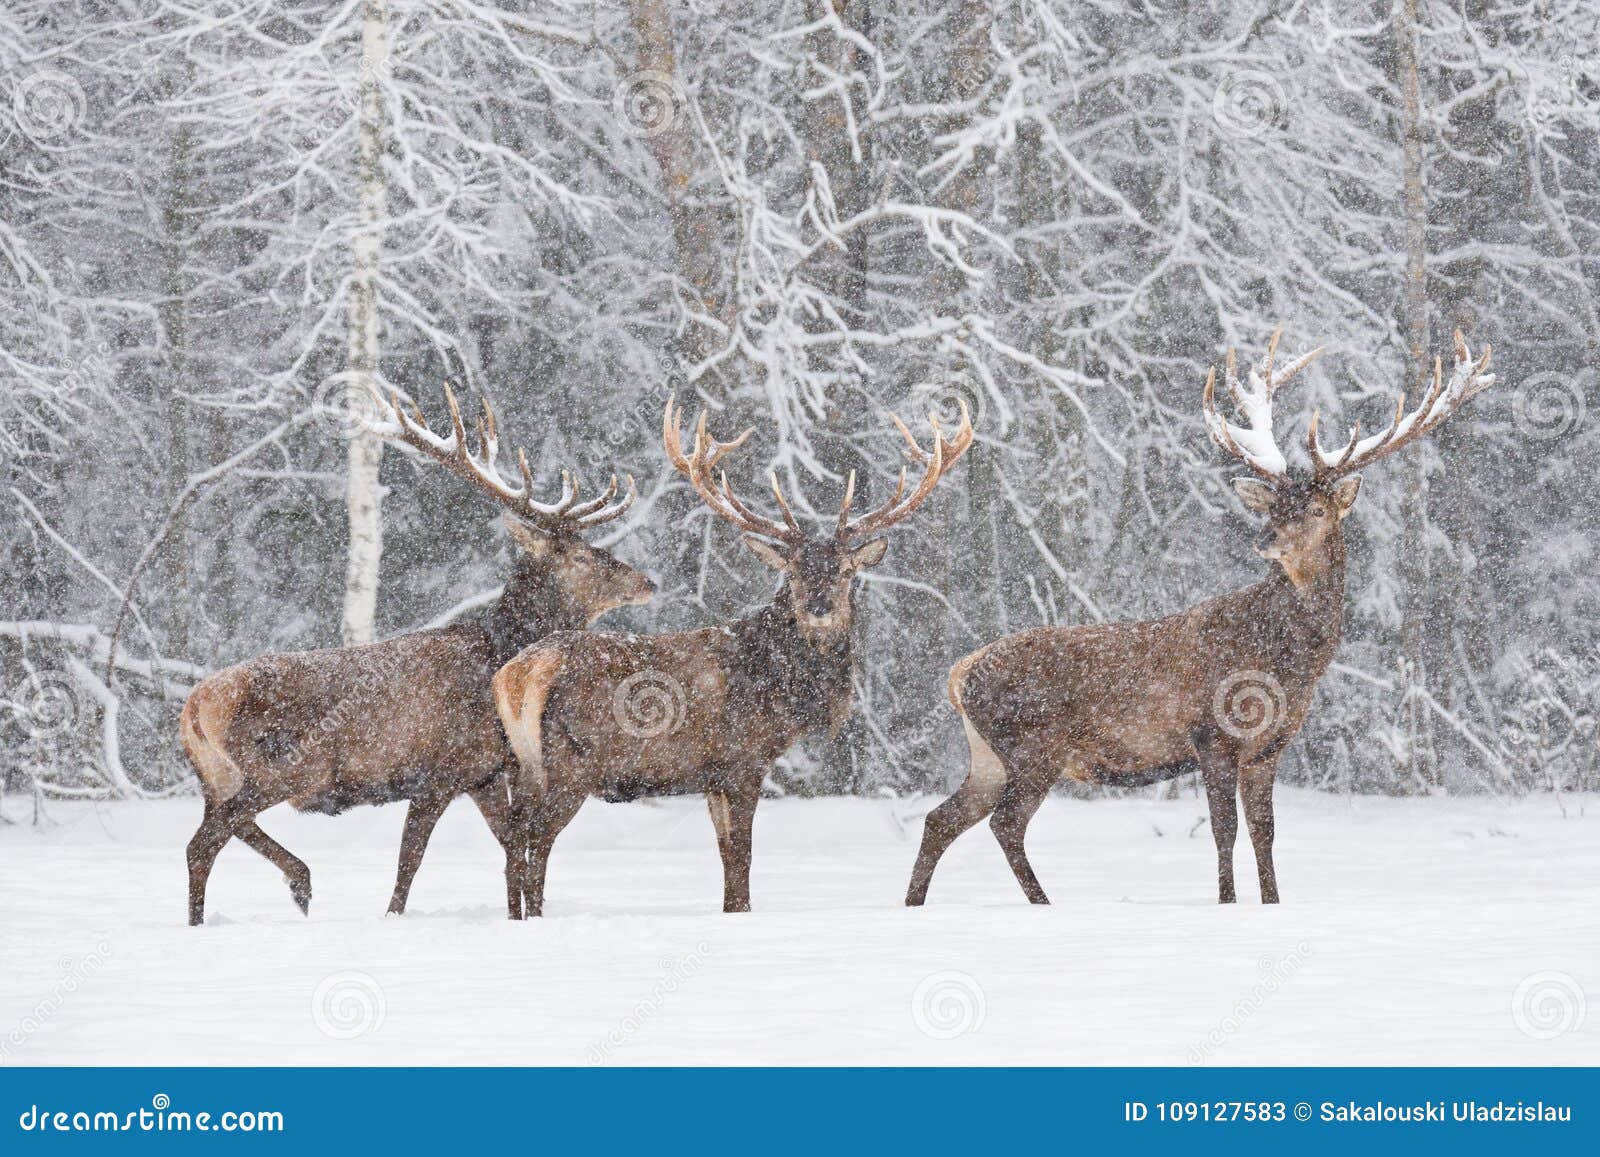 let it snow: three snow-covered red deer stag cervidae stand on the outskirts of forest.three noble deer cervus elaphus du